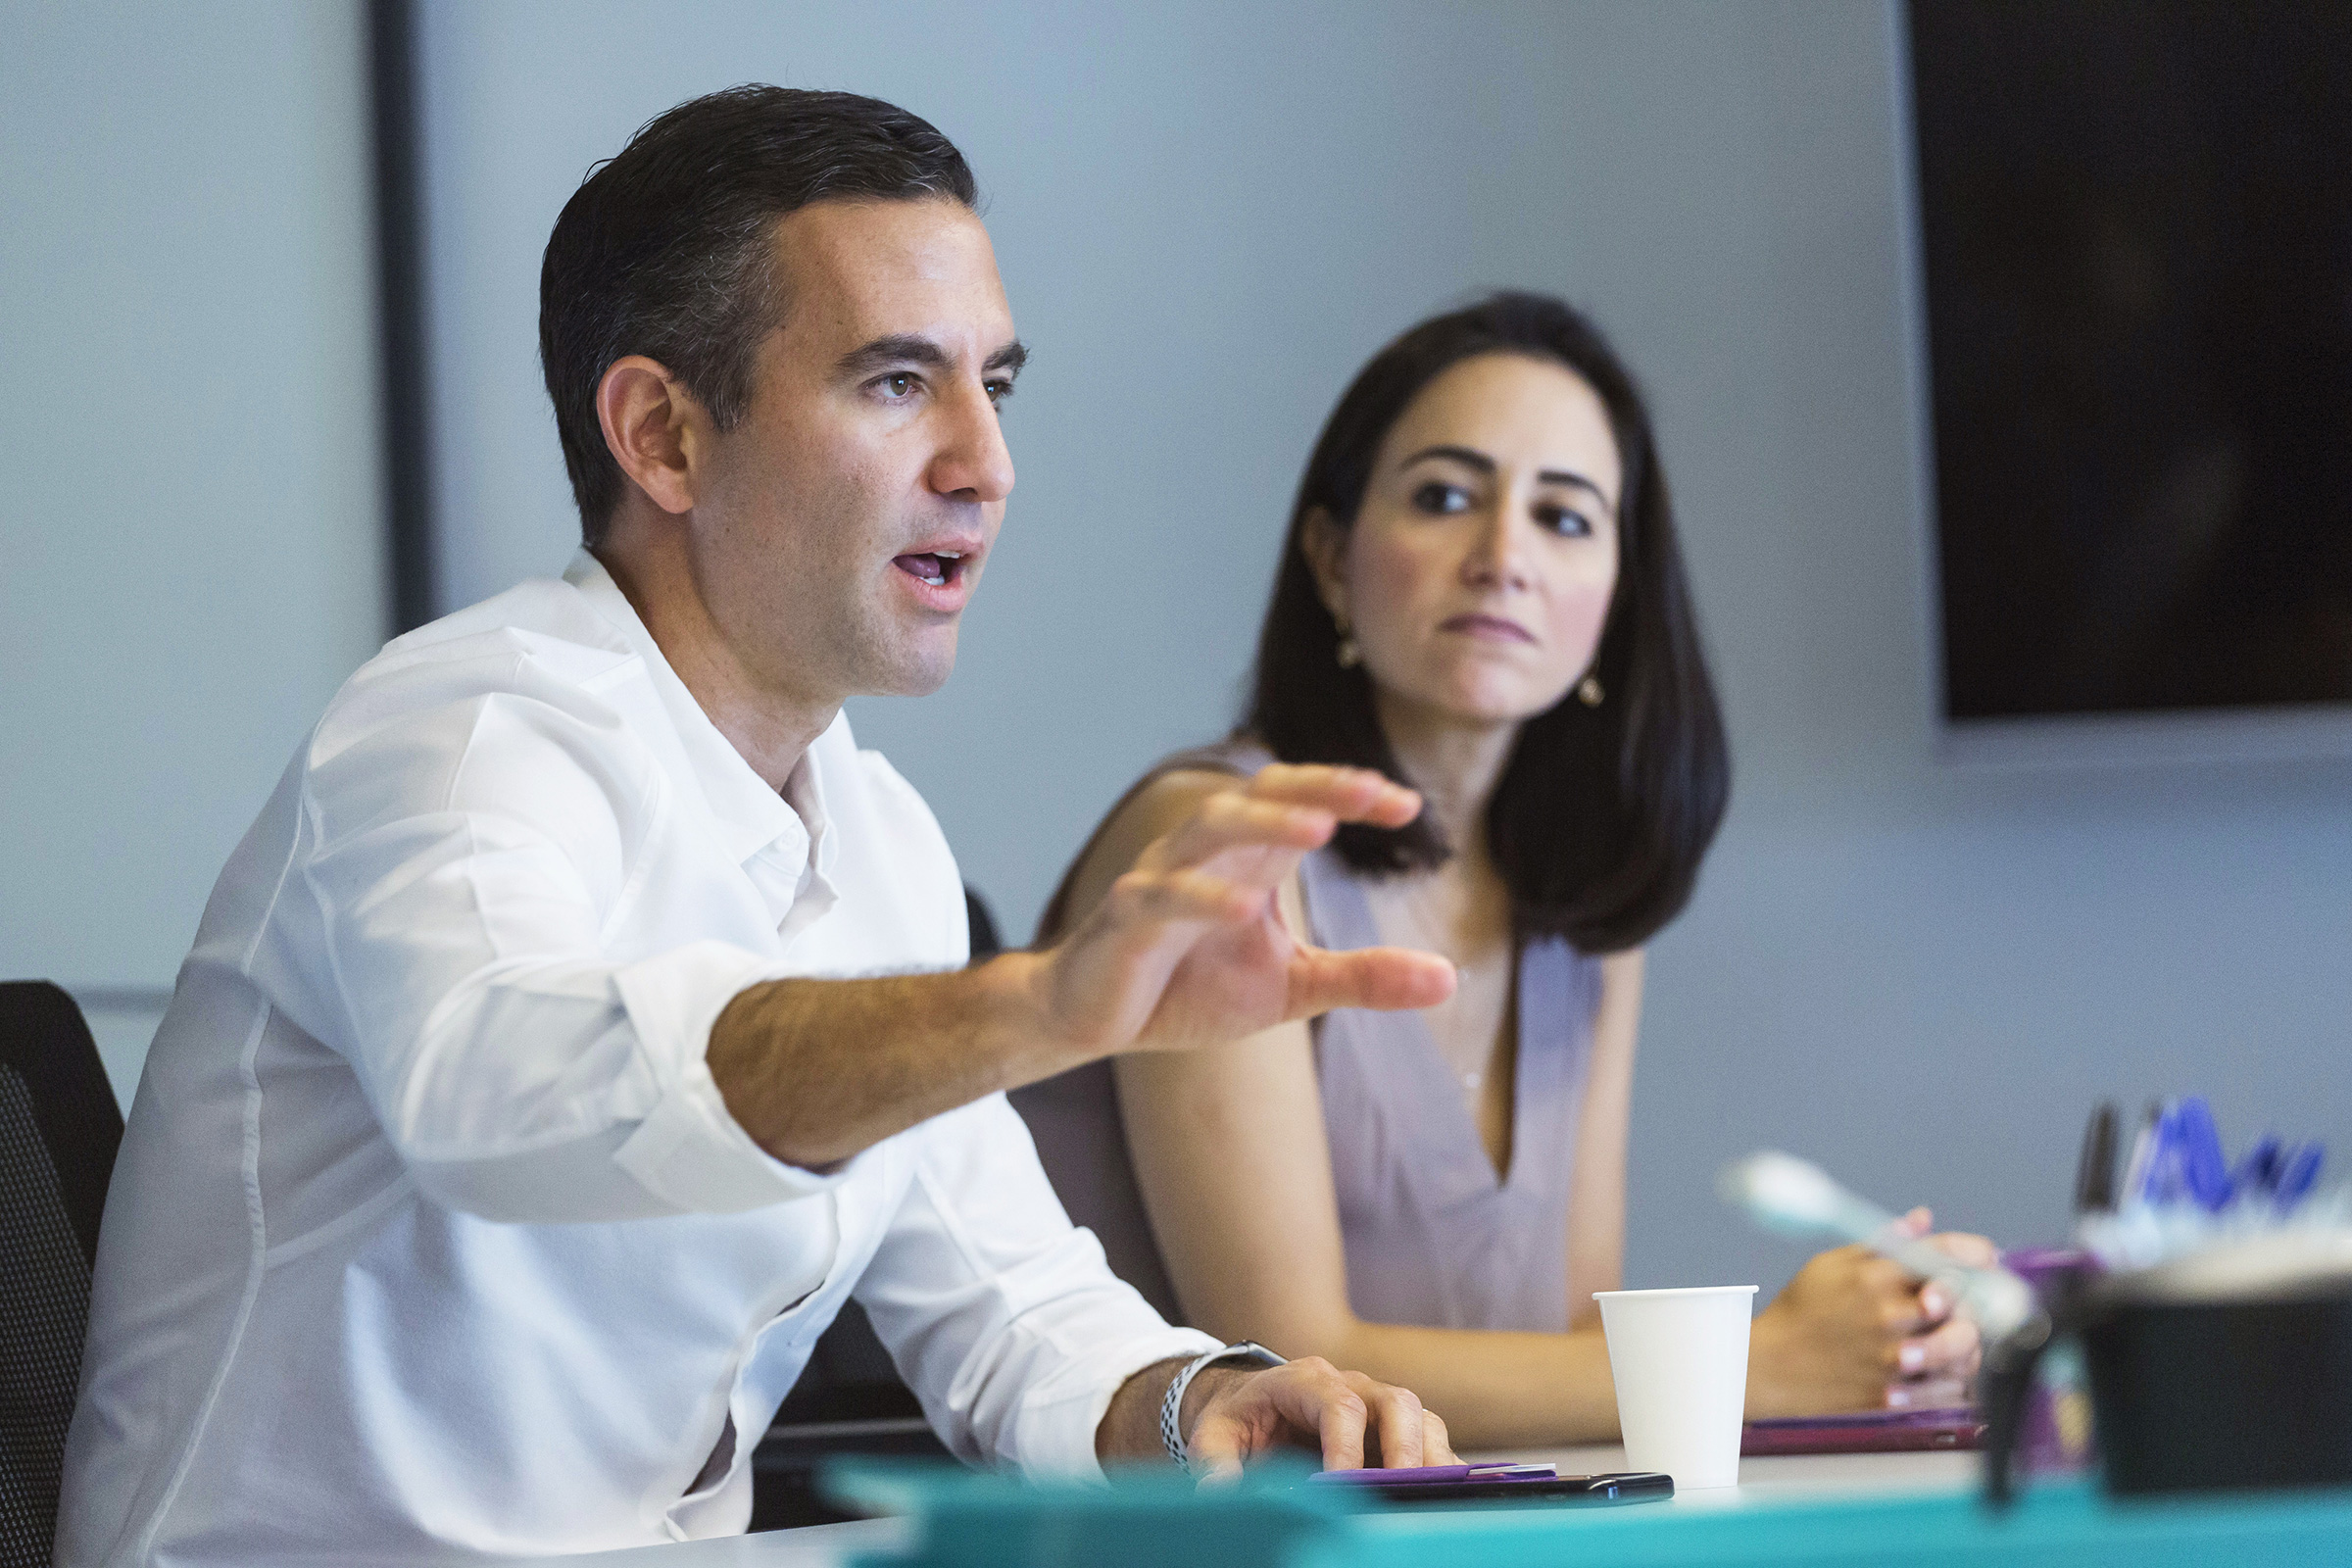 David Velez, founder and CEO of Nubank, left, and Cristina Junqueira, co-founder at NuBank, during an interview in São Paulo on Feb. 7, 2019. (Rodrigo Capote—Bloomberg/Getty Images)